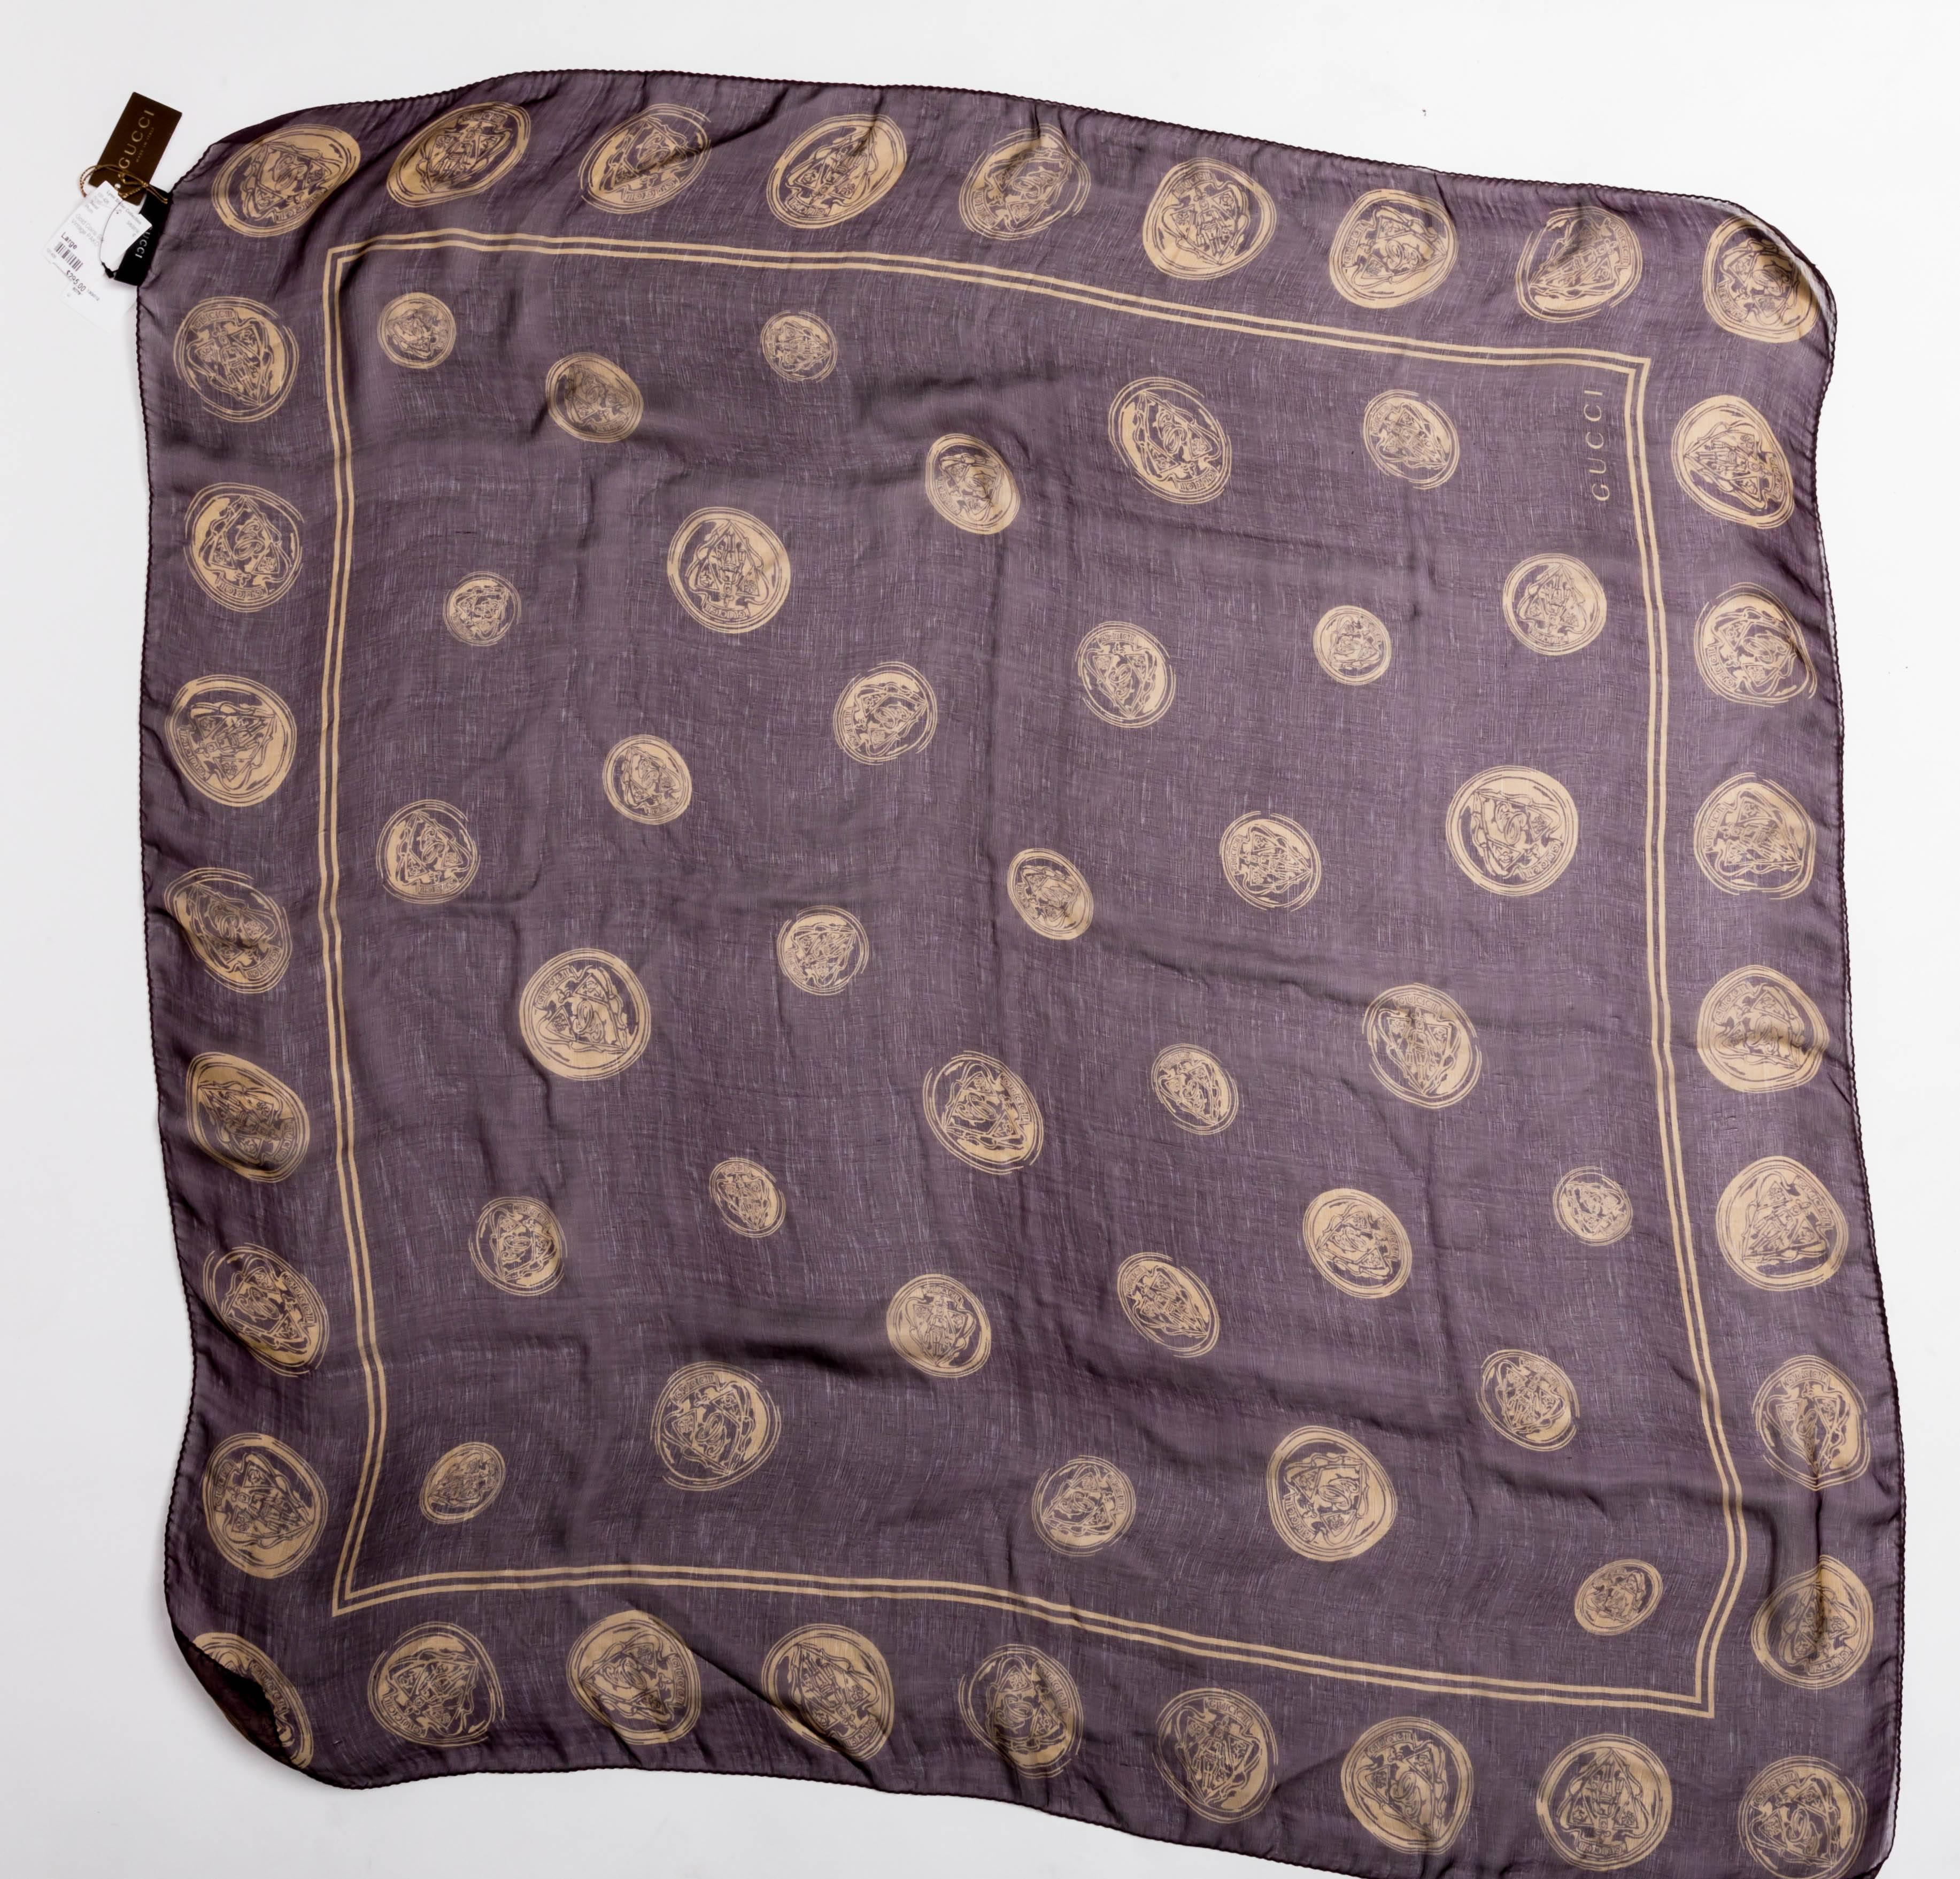 Wonderful vintage Gucci scarf in aubergine with gold coins featured throughout. This scarf has never been used and its original Gucci tags are still attached.
